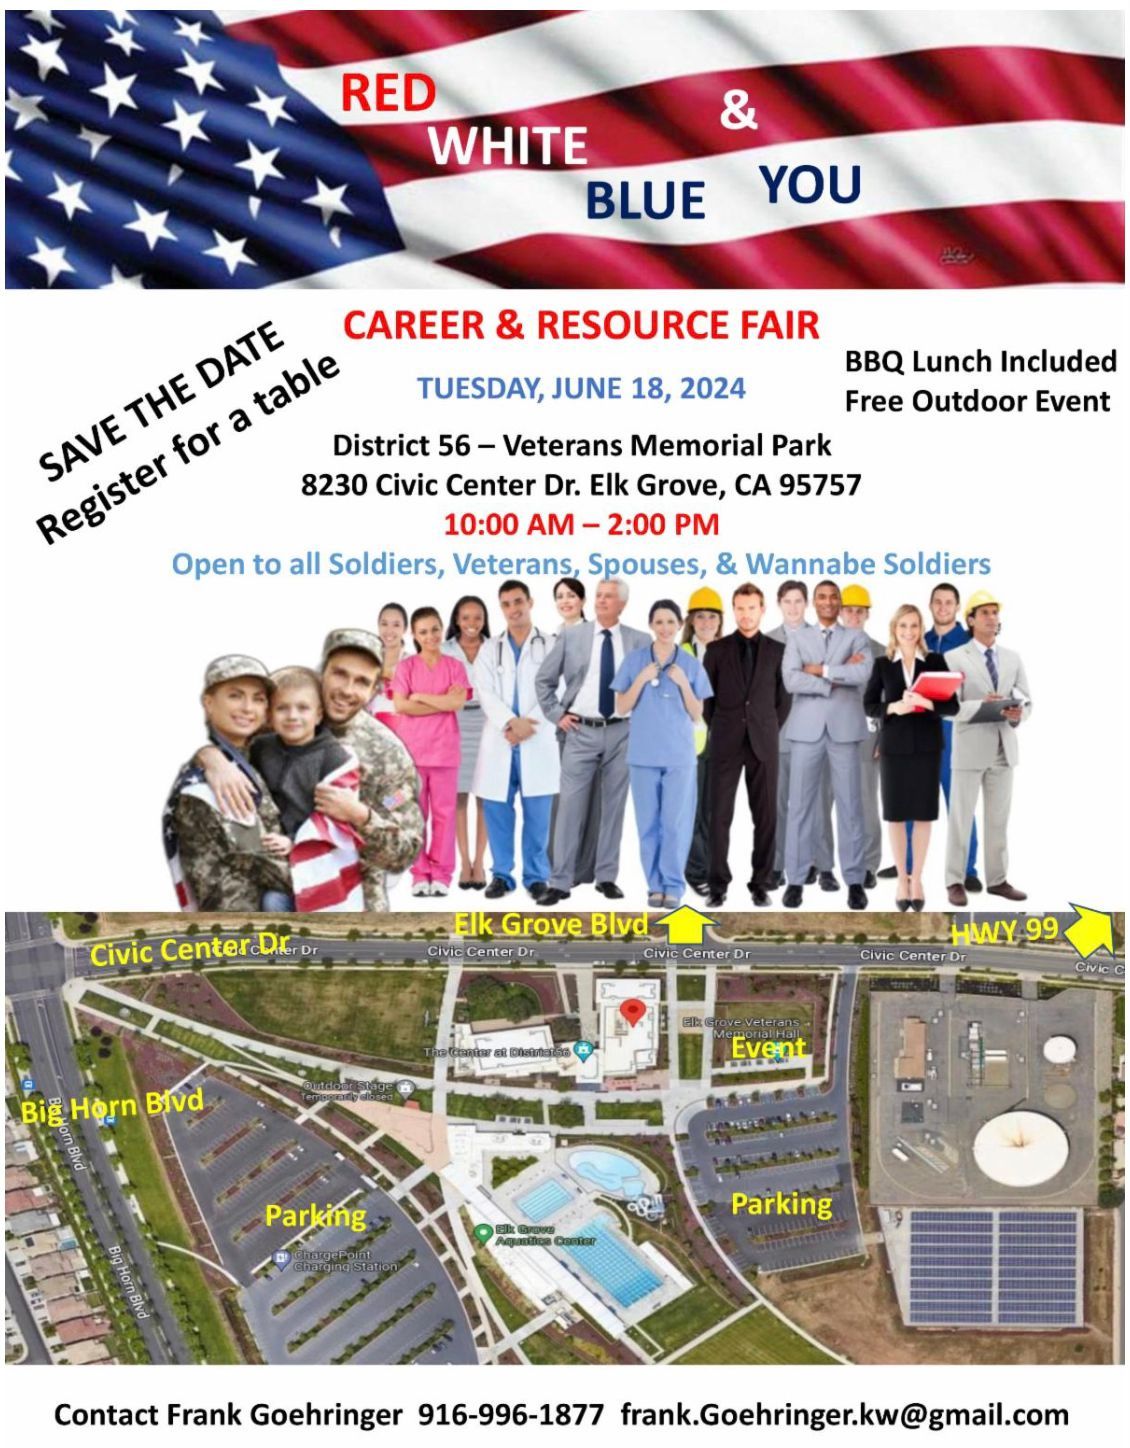 Red White Blue & You - Career & Resource Fair